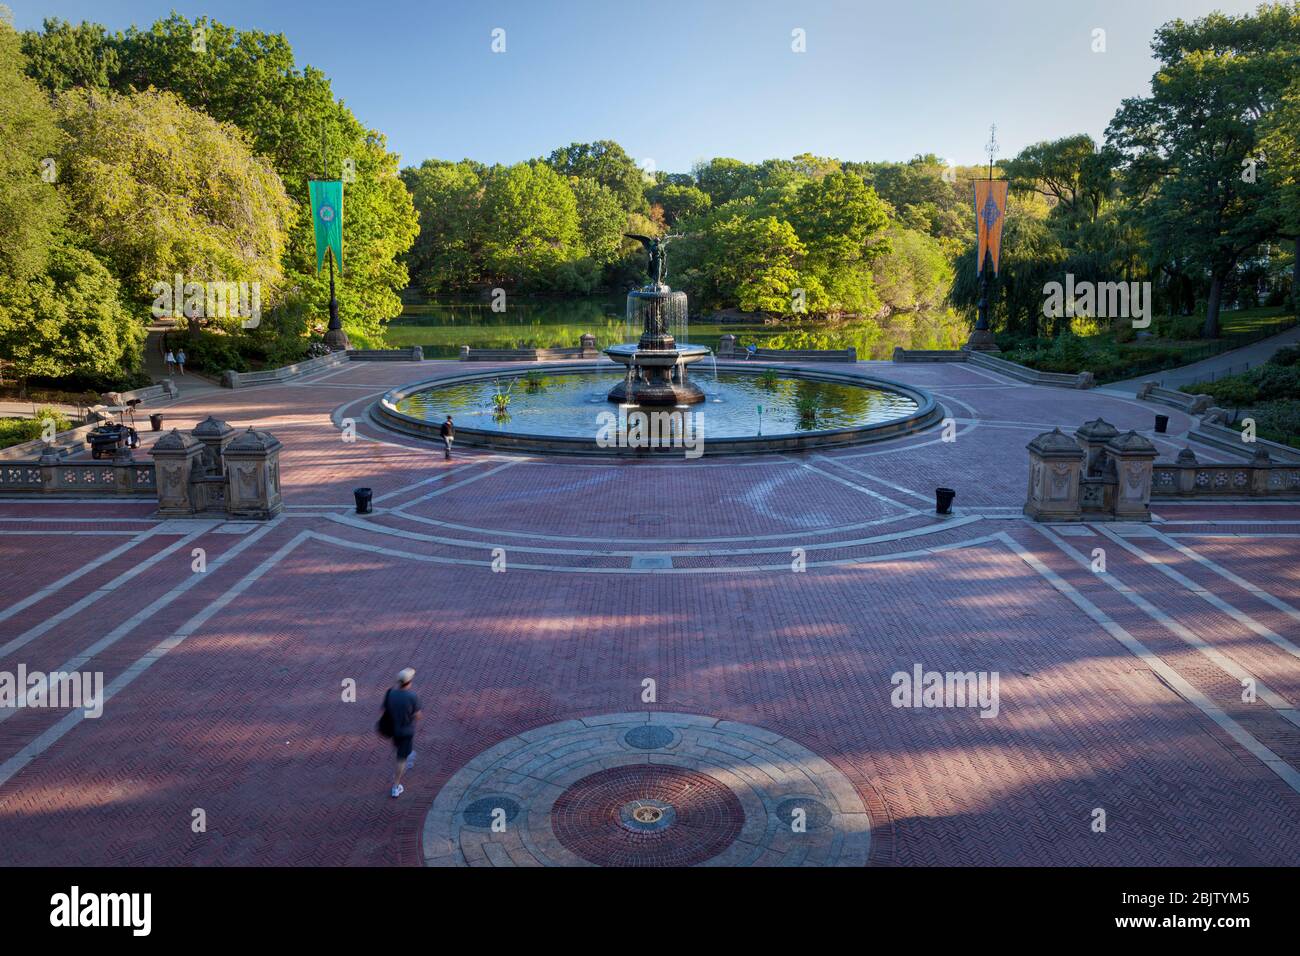 Check Out This Clever Photograph Showing All 4 Seasons at Bethesda Terrace  in Central Park